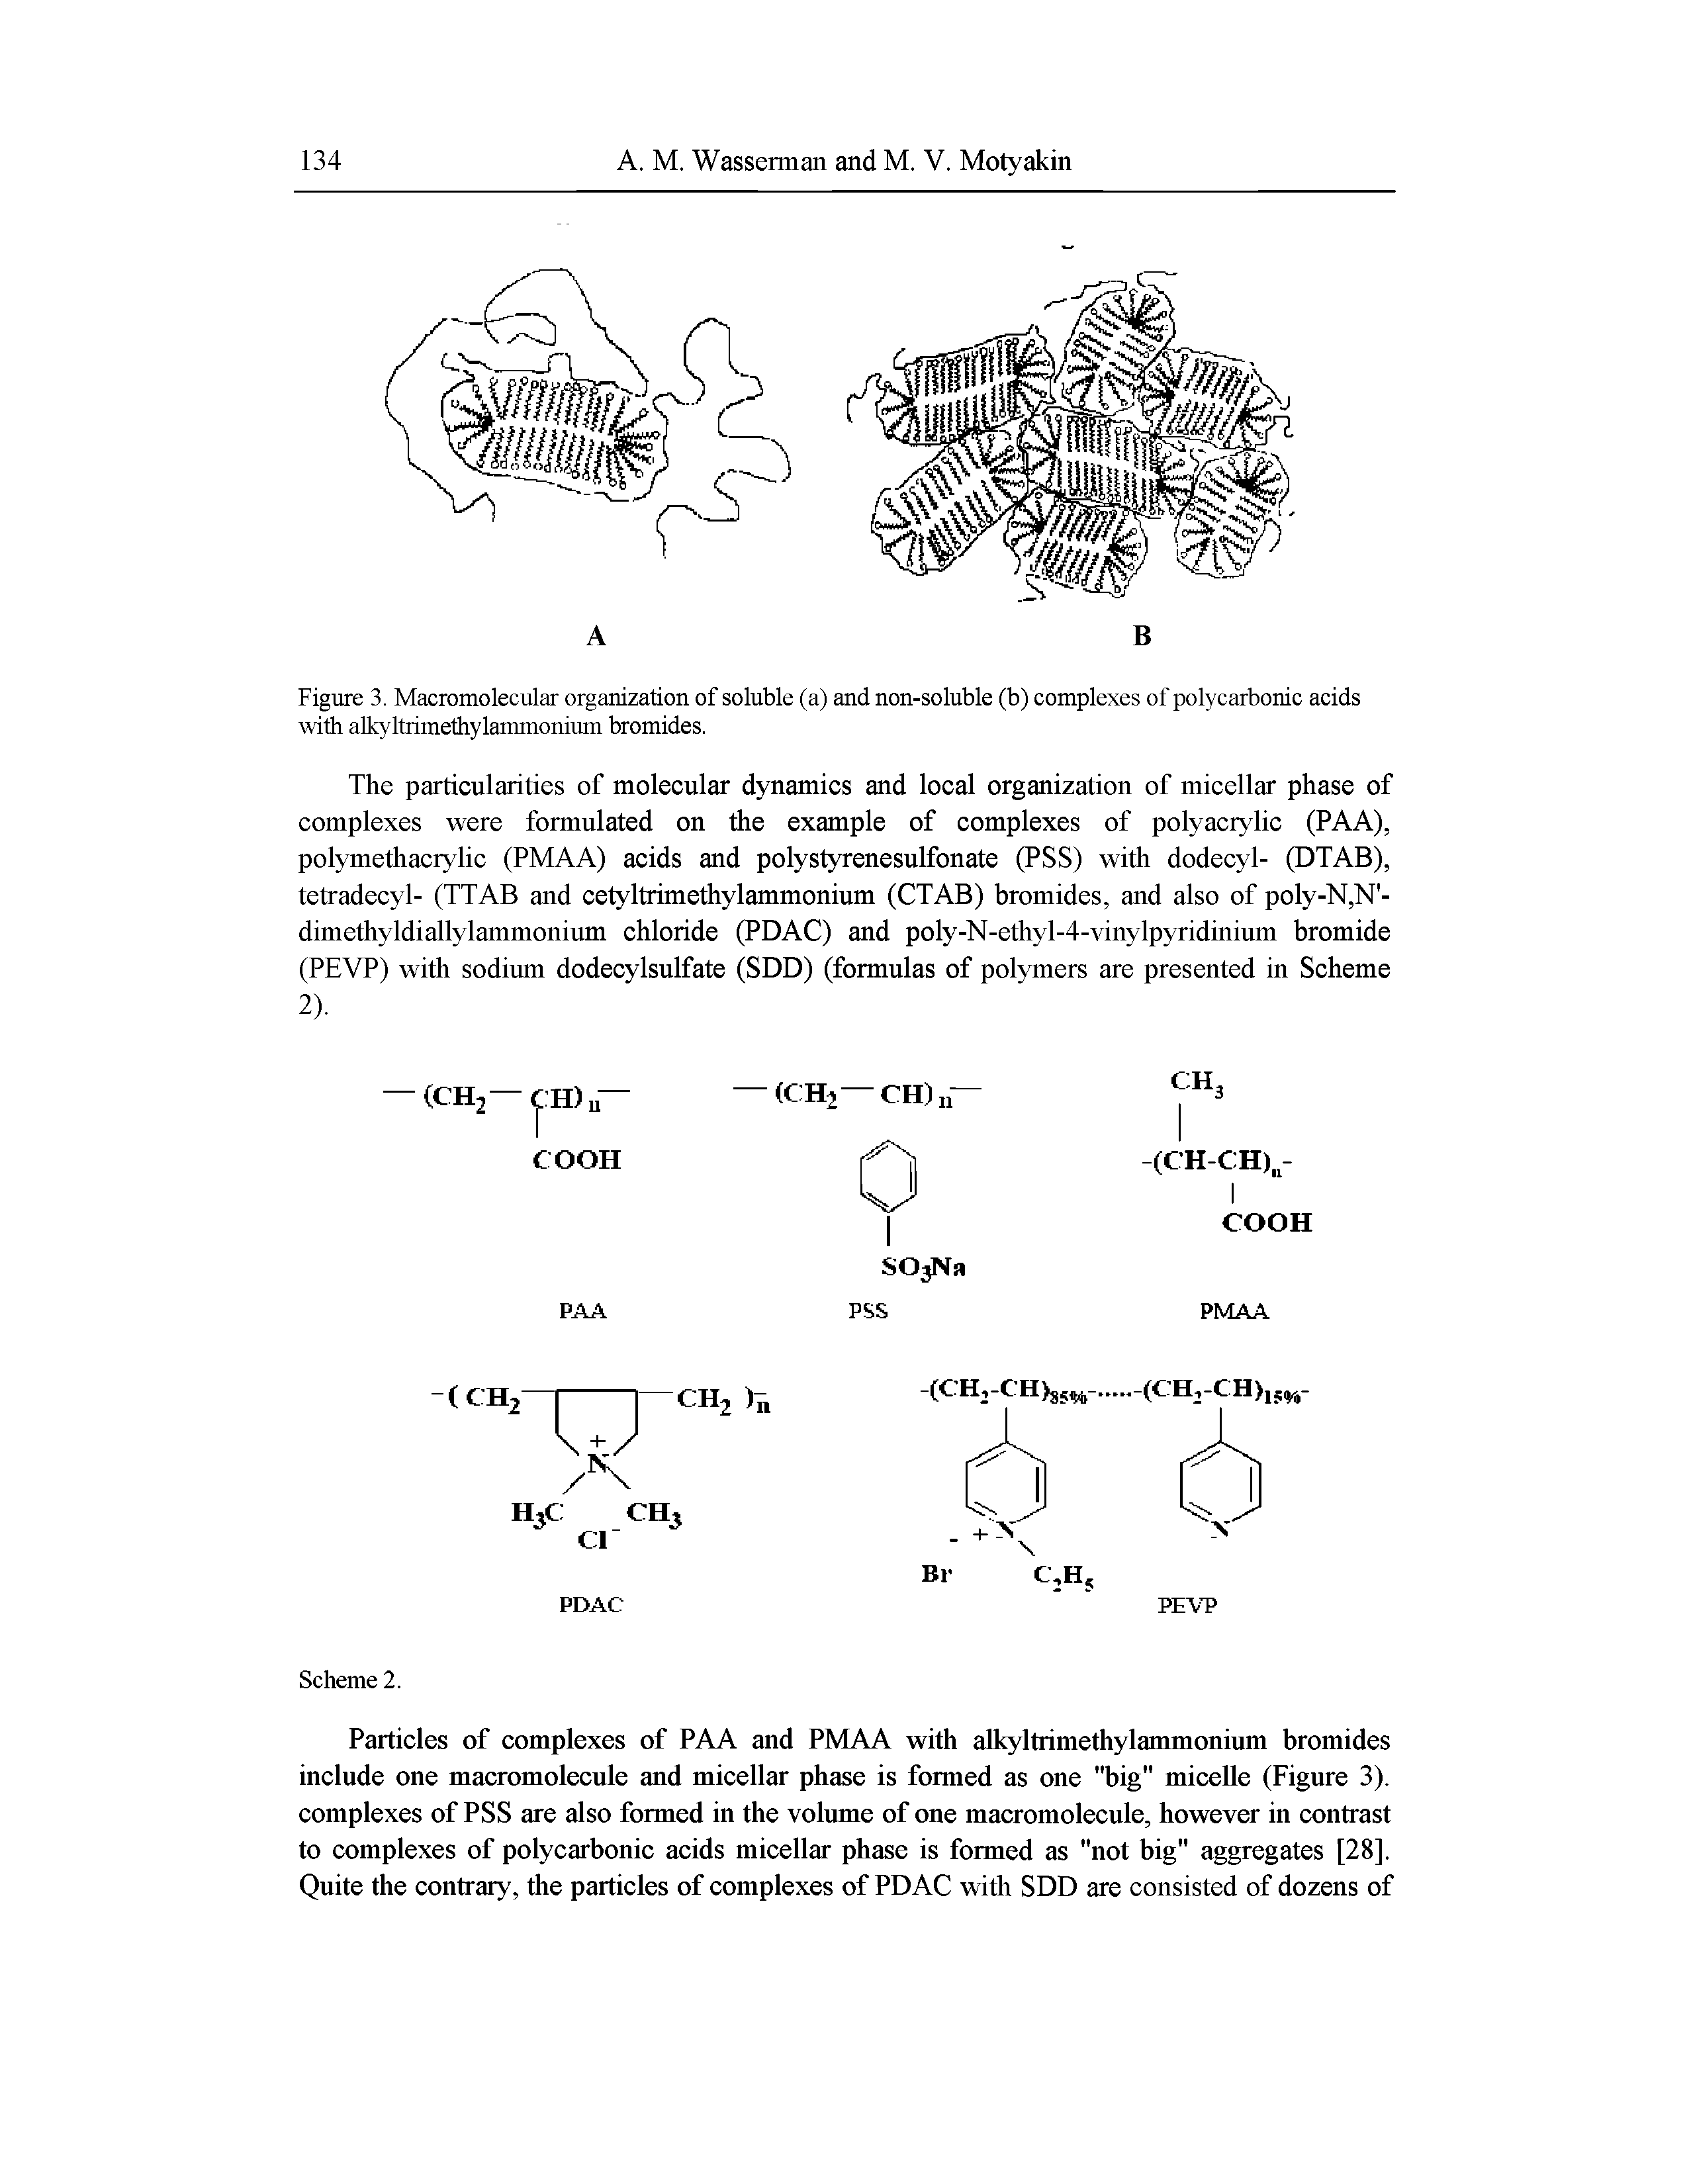 Figure 3. Macromolecular organization of soluble (a) and non-soluble (b) complexes of polycarbonic acids with alkyltrimethylammonium bromides.